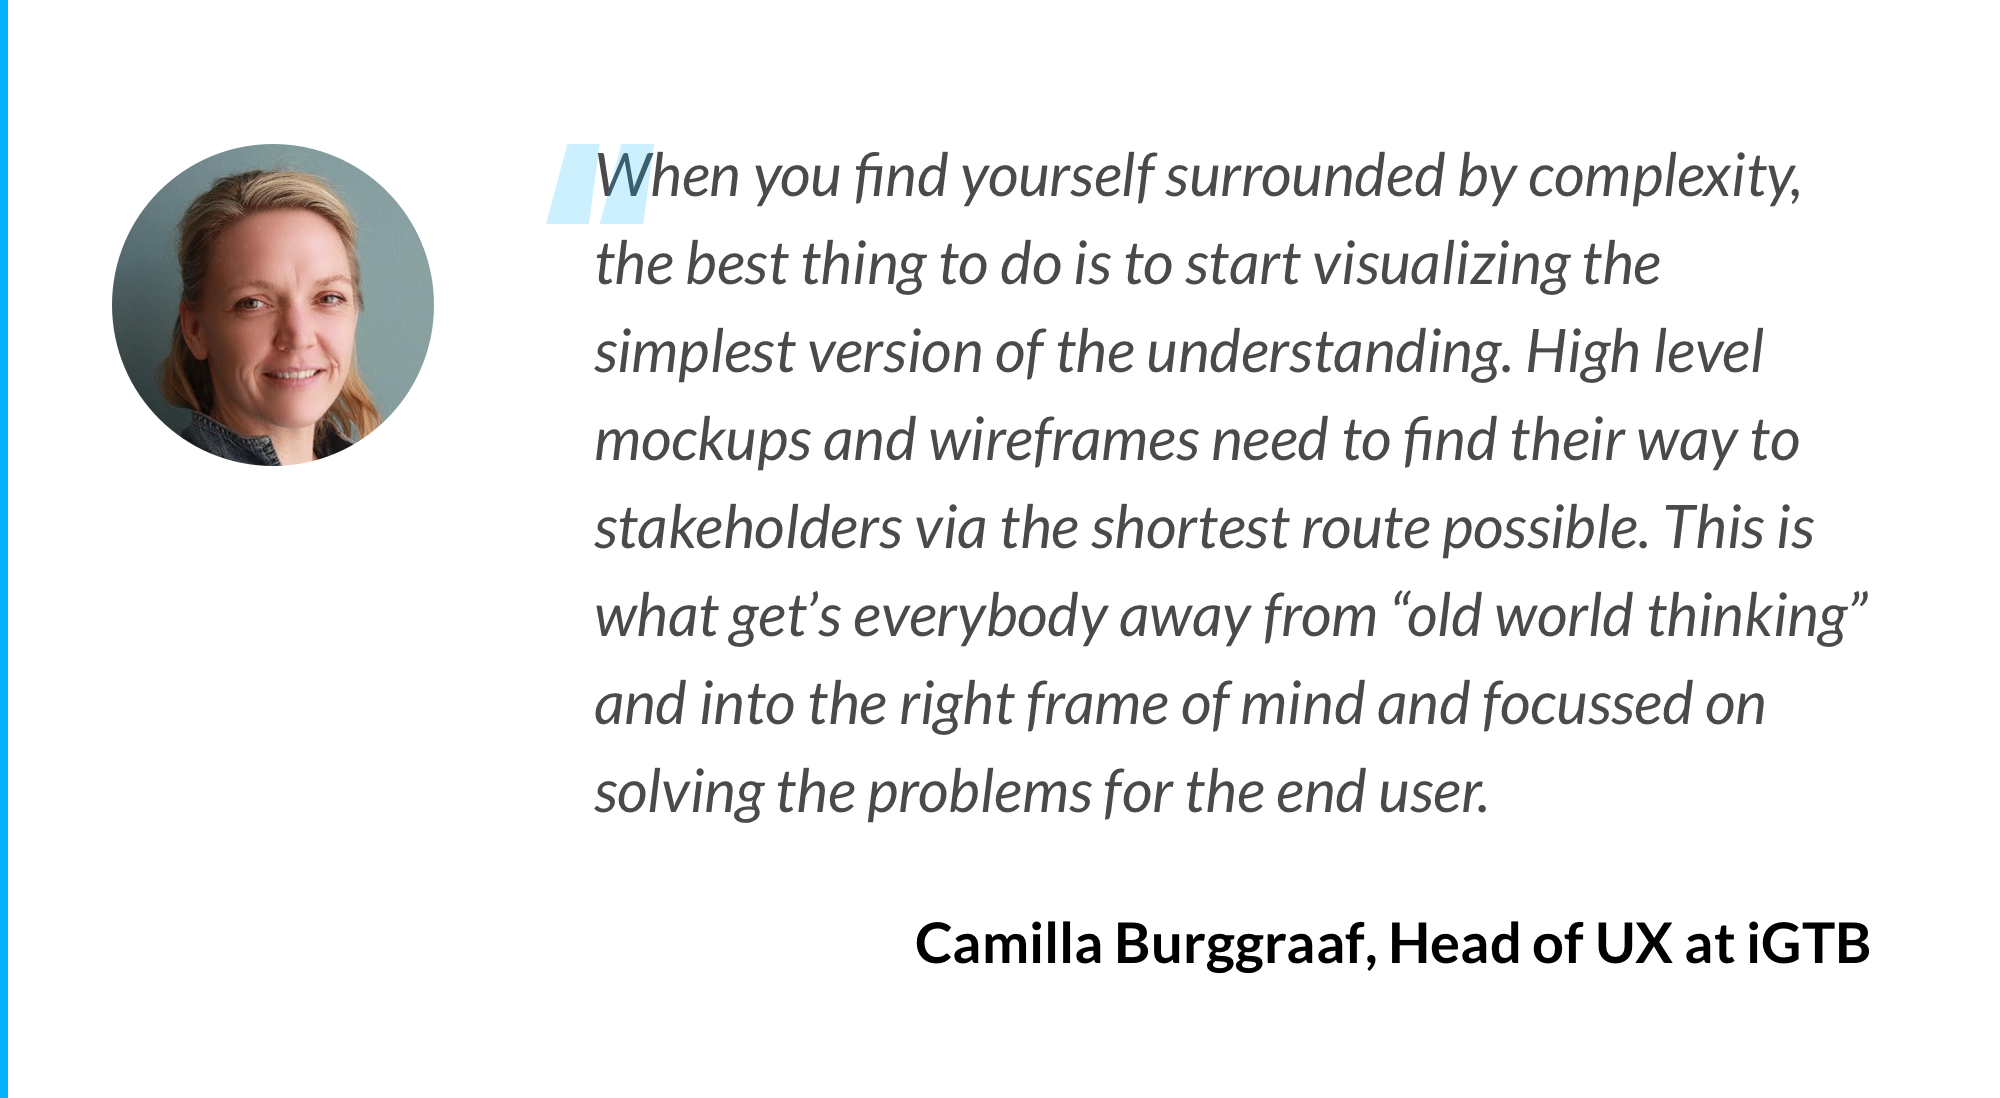 igtb-case-study-quote-camilla-burggraaf-2-at-2x.png